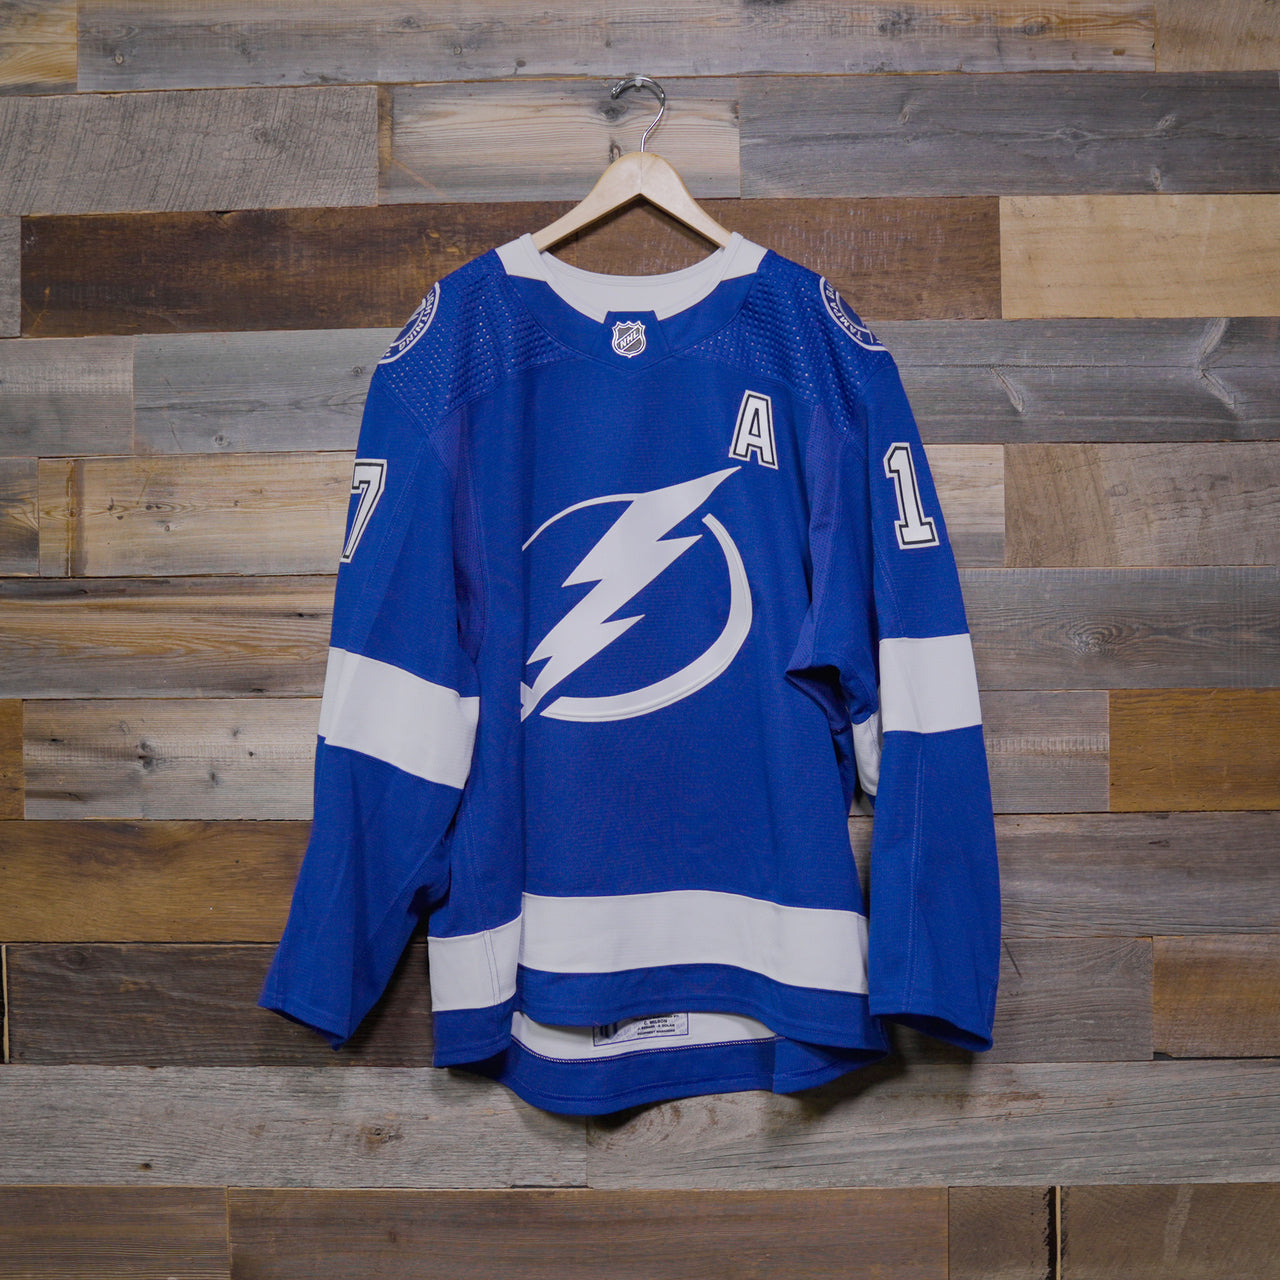 #17 KILLORN (A) 2022 Game-Worn Lightning Home Playoff Jersey (Size 58)